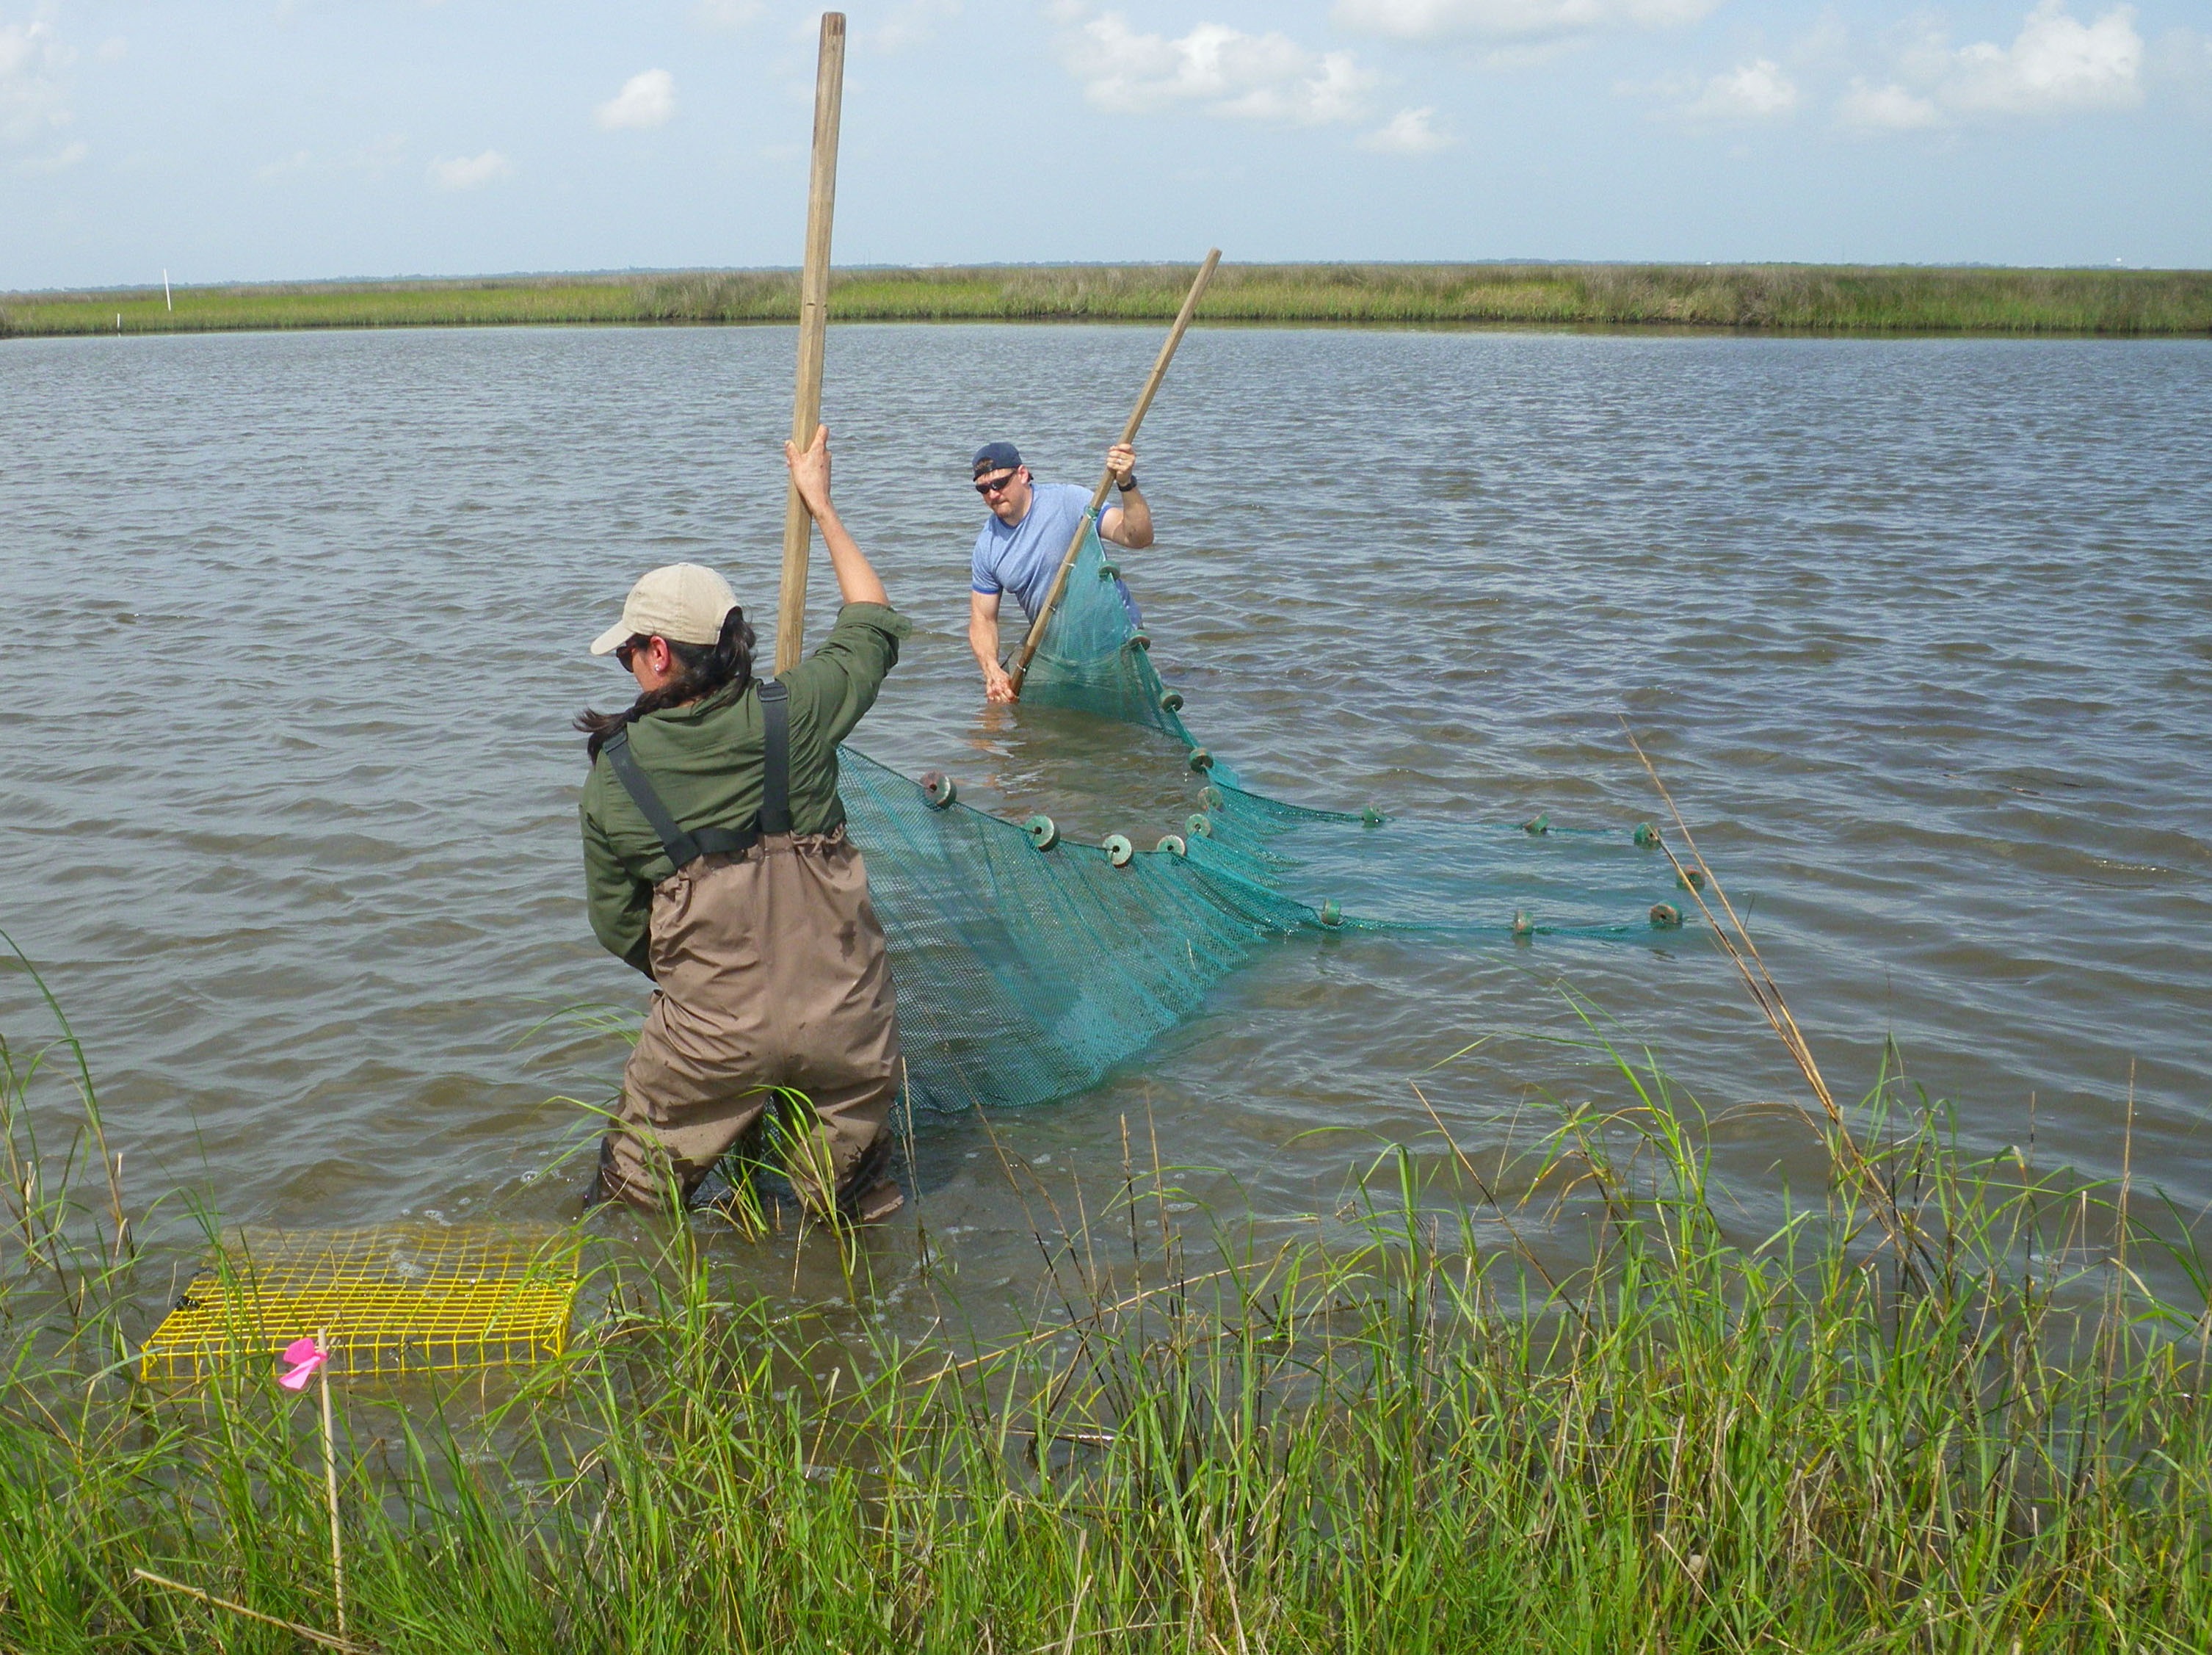 Conducting research in Gulf of Mexico marshes